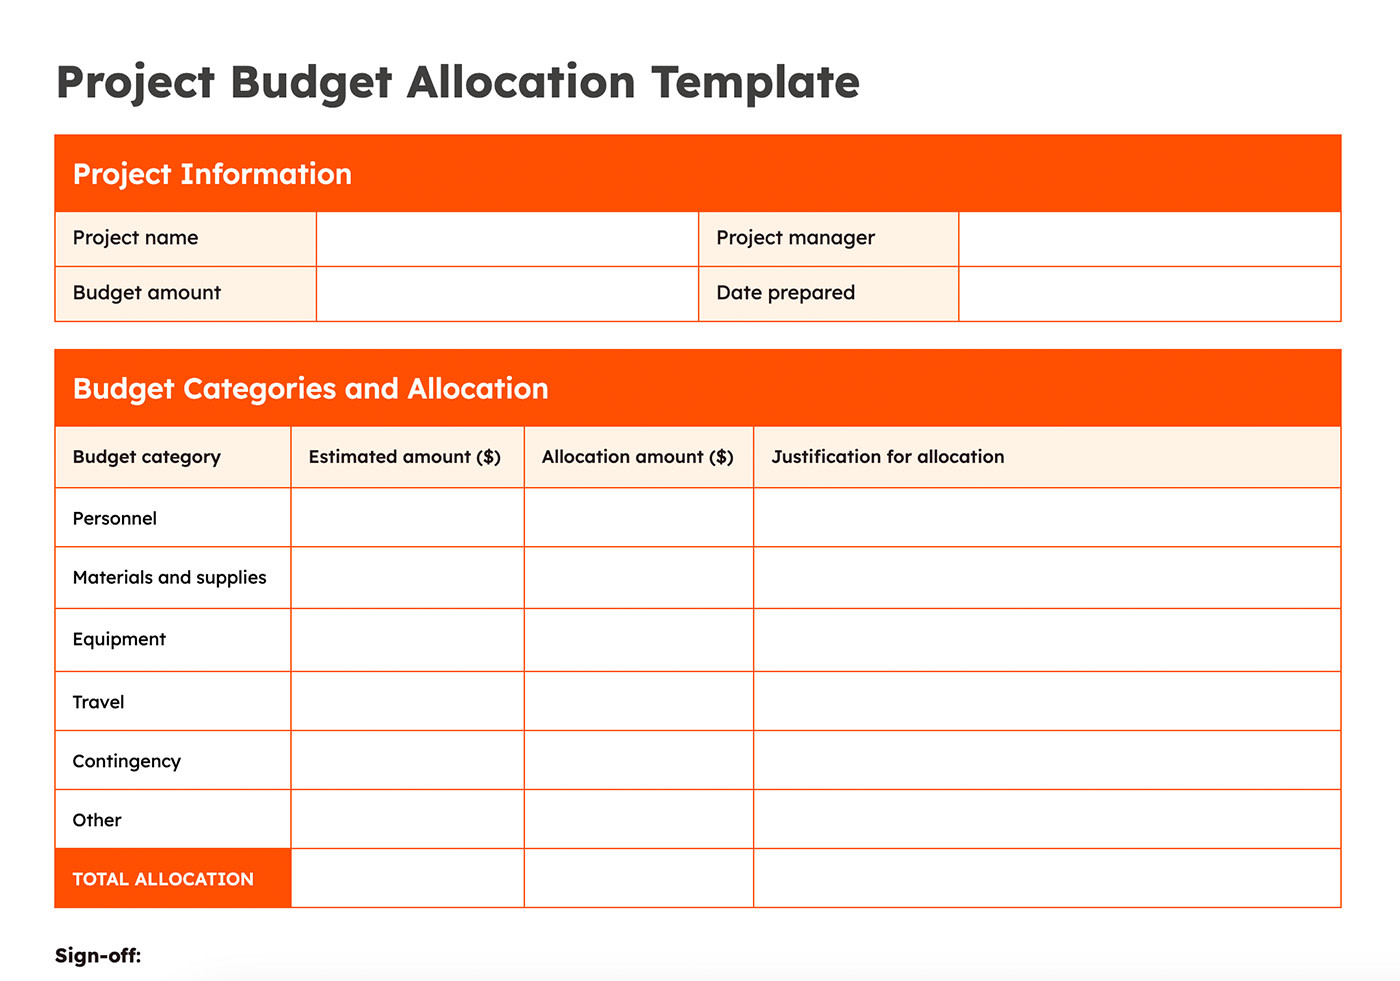 Screenshot of a project budget allocation template